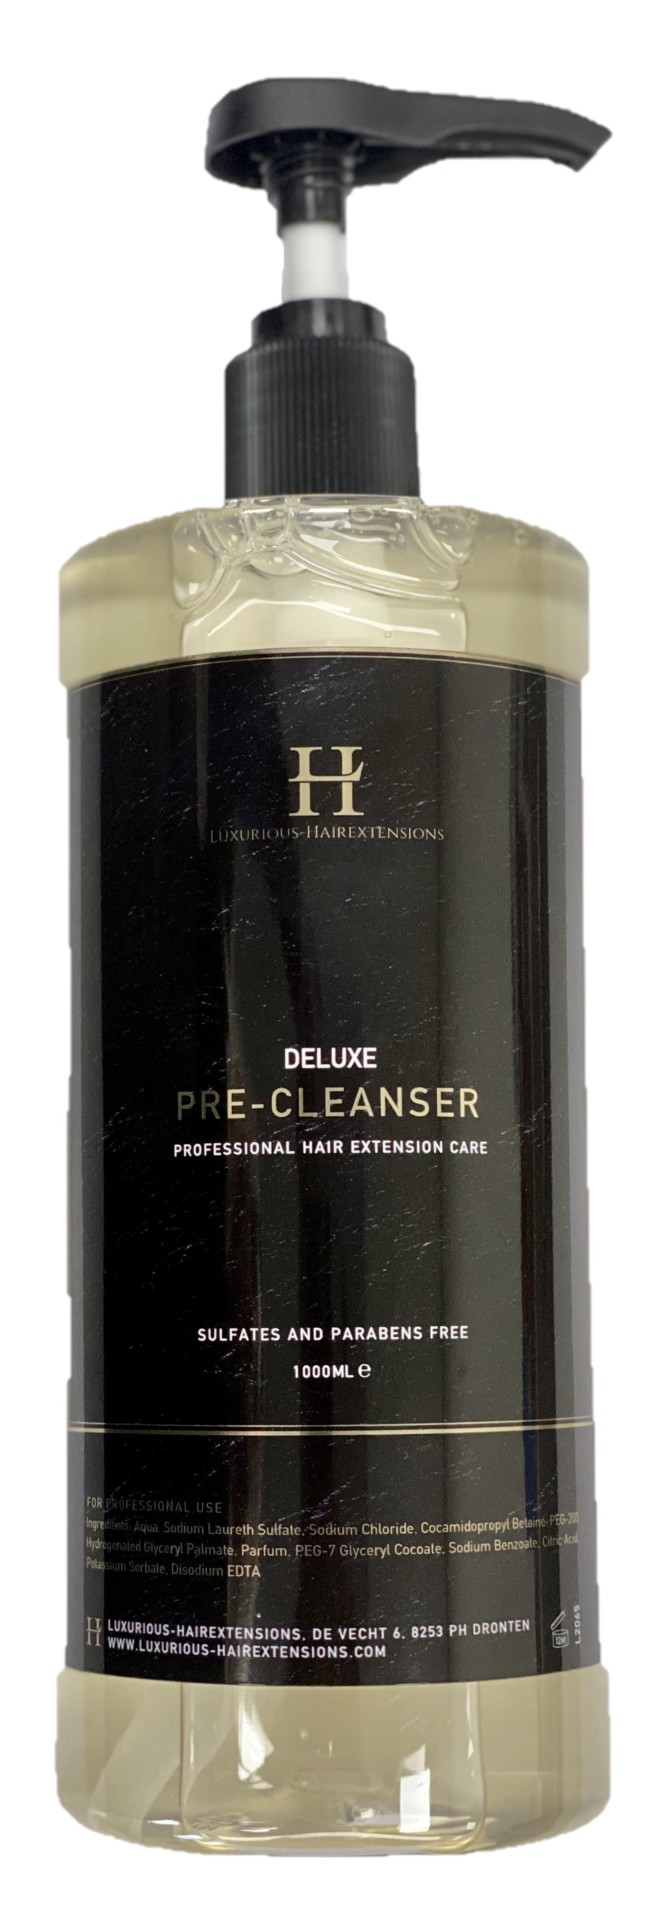 LH_Deluxe-Pre-cleanser